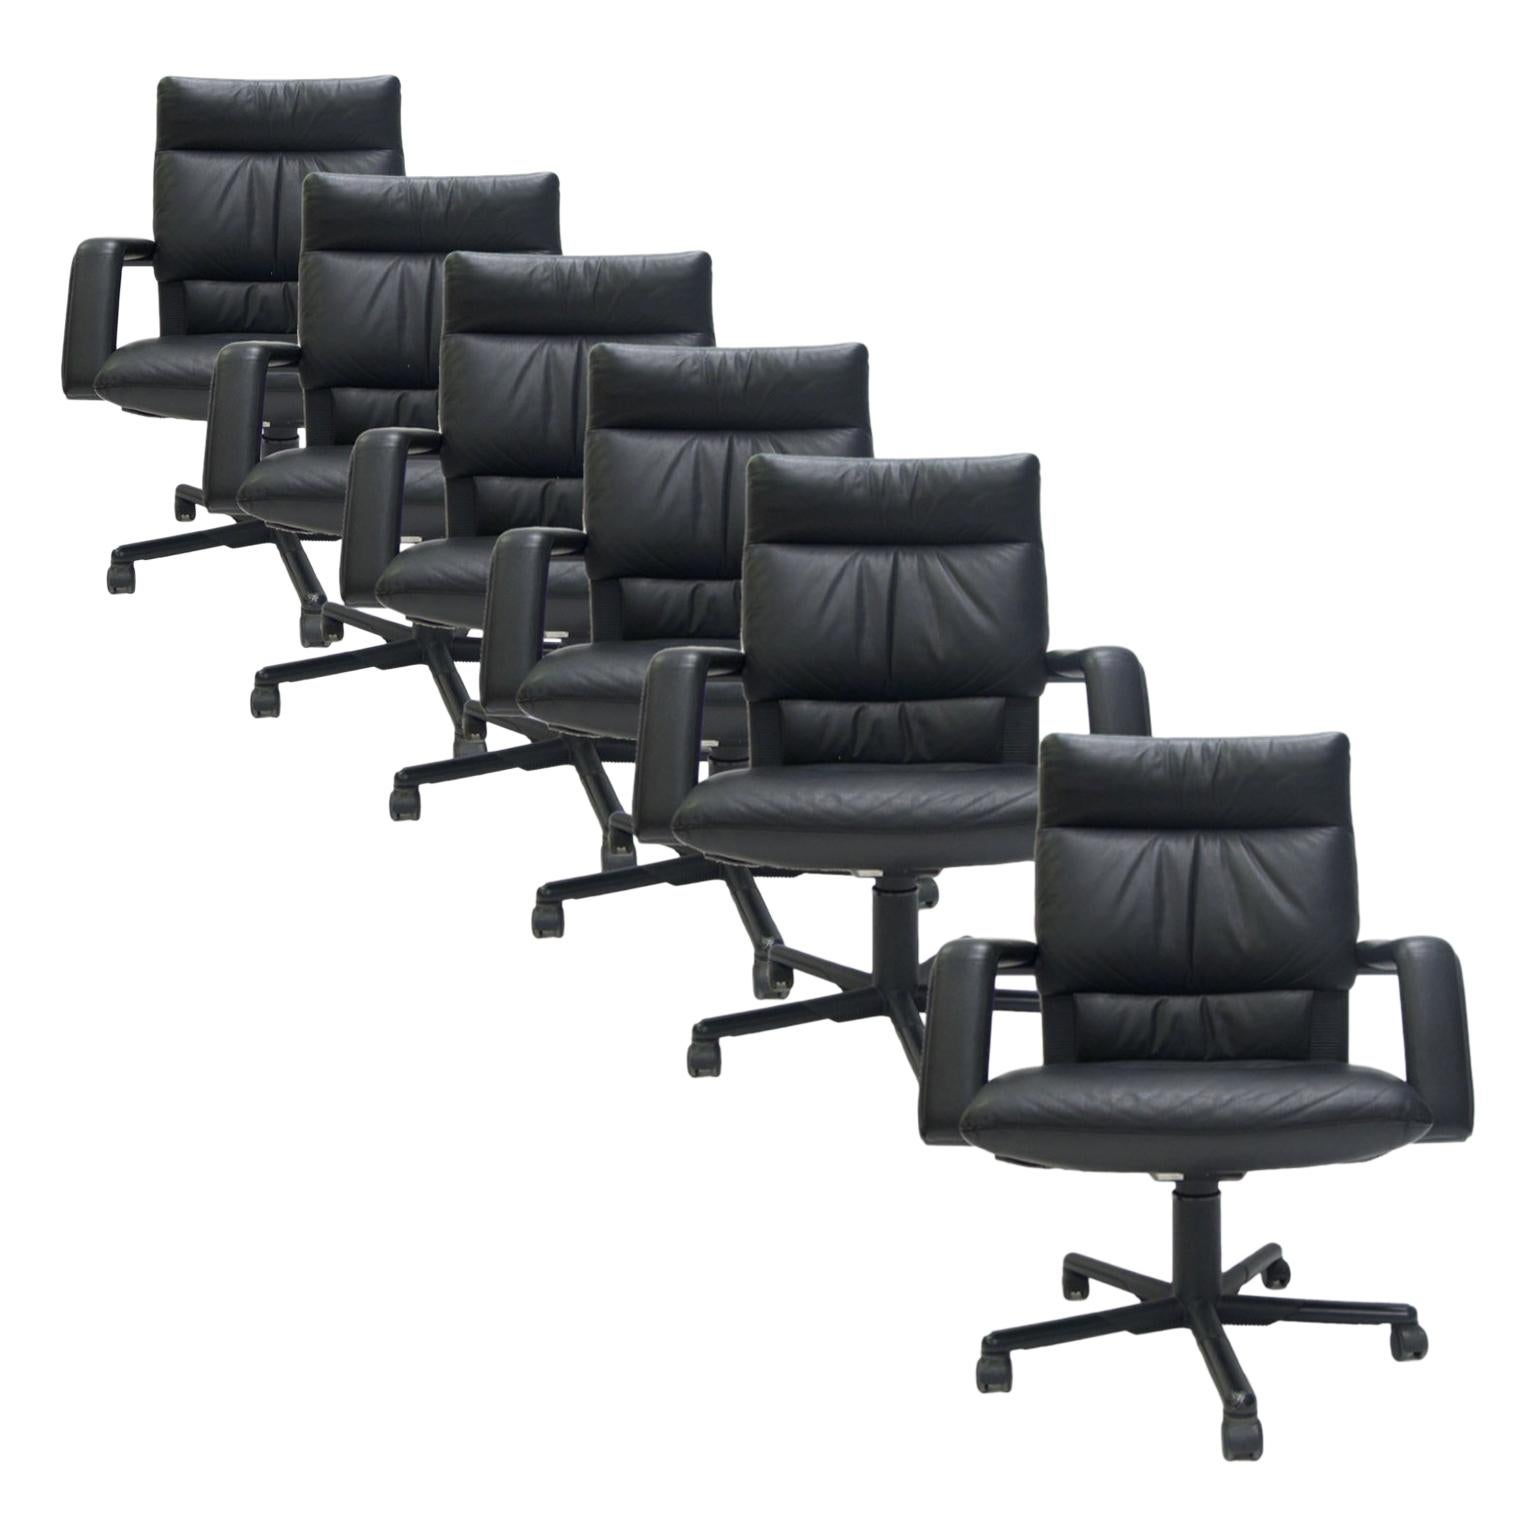 8 Mario Bellini for Vitra Leather Swivel and Tilt Executive Desk Office Chairs